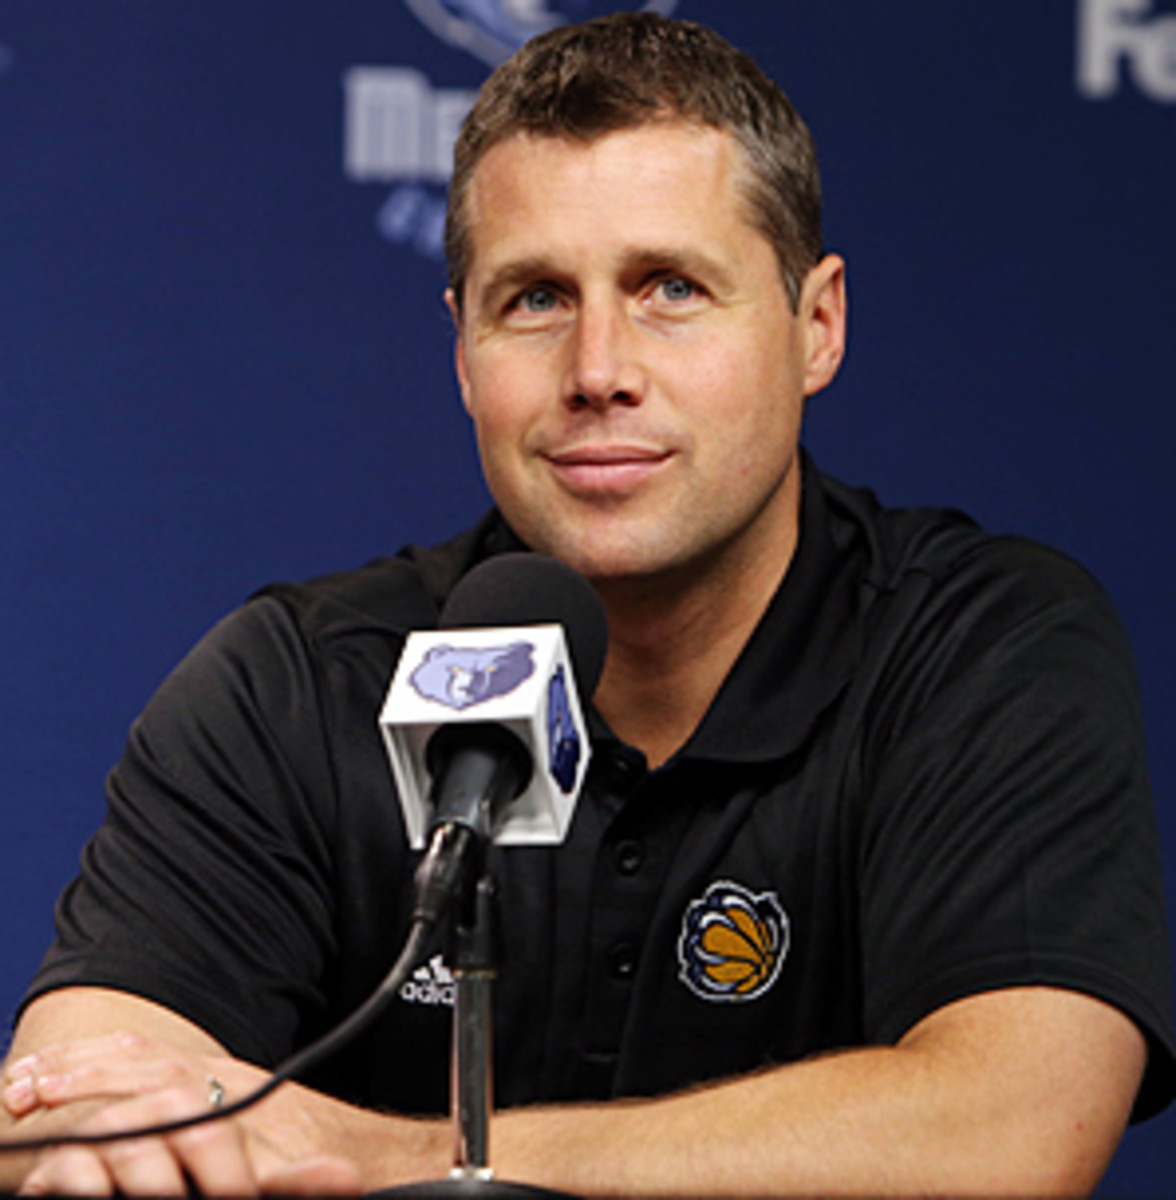 David Joerger spent six seasons as a Grizzlies assistant before being promoted to head coach.